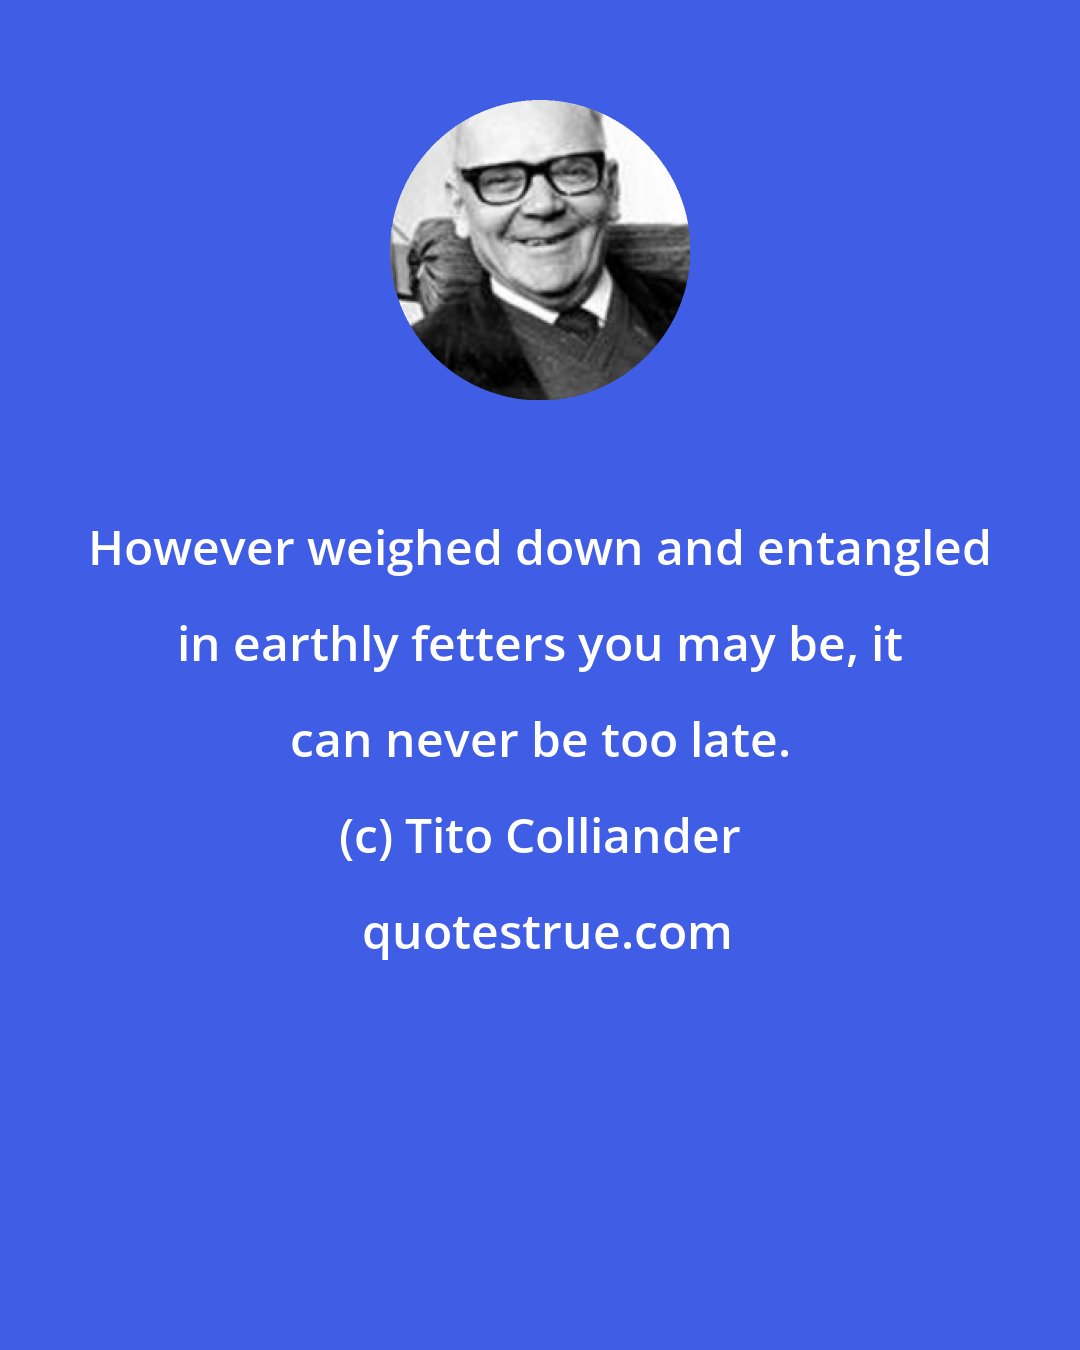 Tito Colliander: However weighed down and entangled in earthly fetters you may be, it can never be too late.